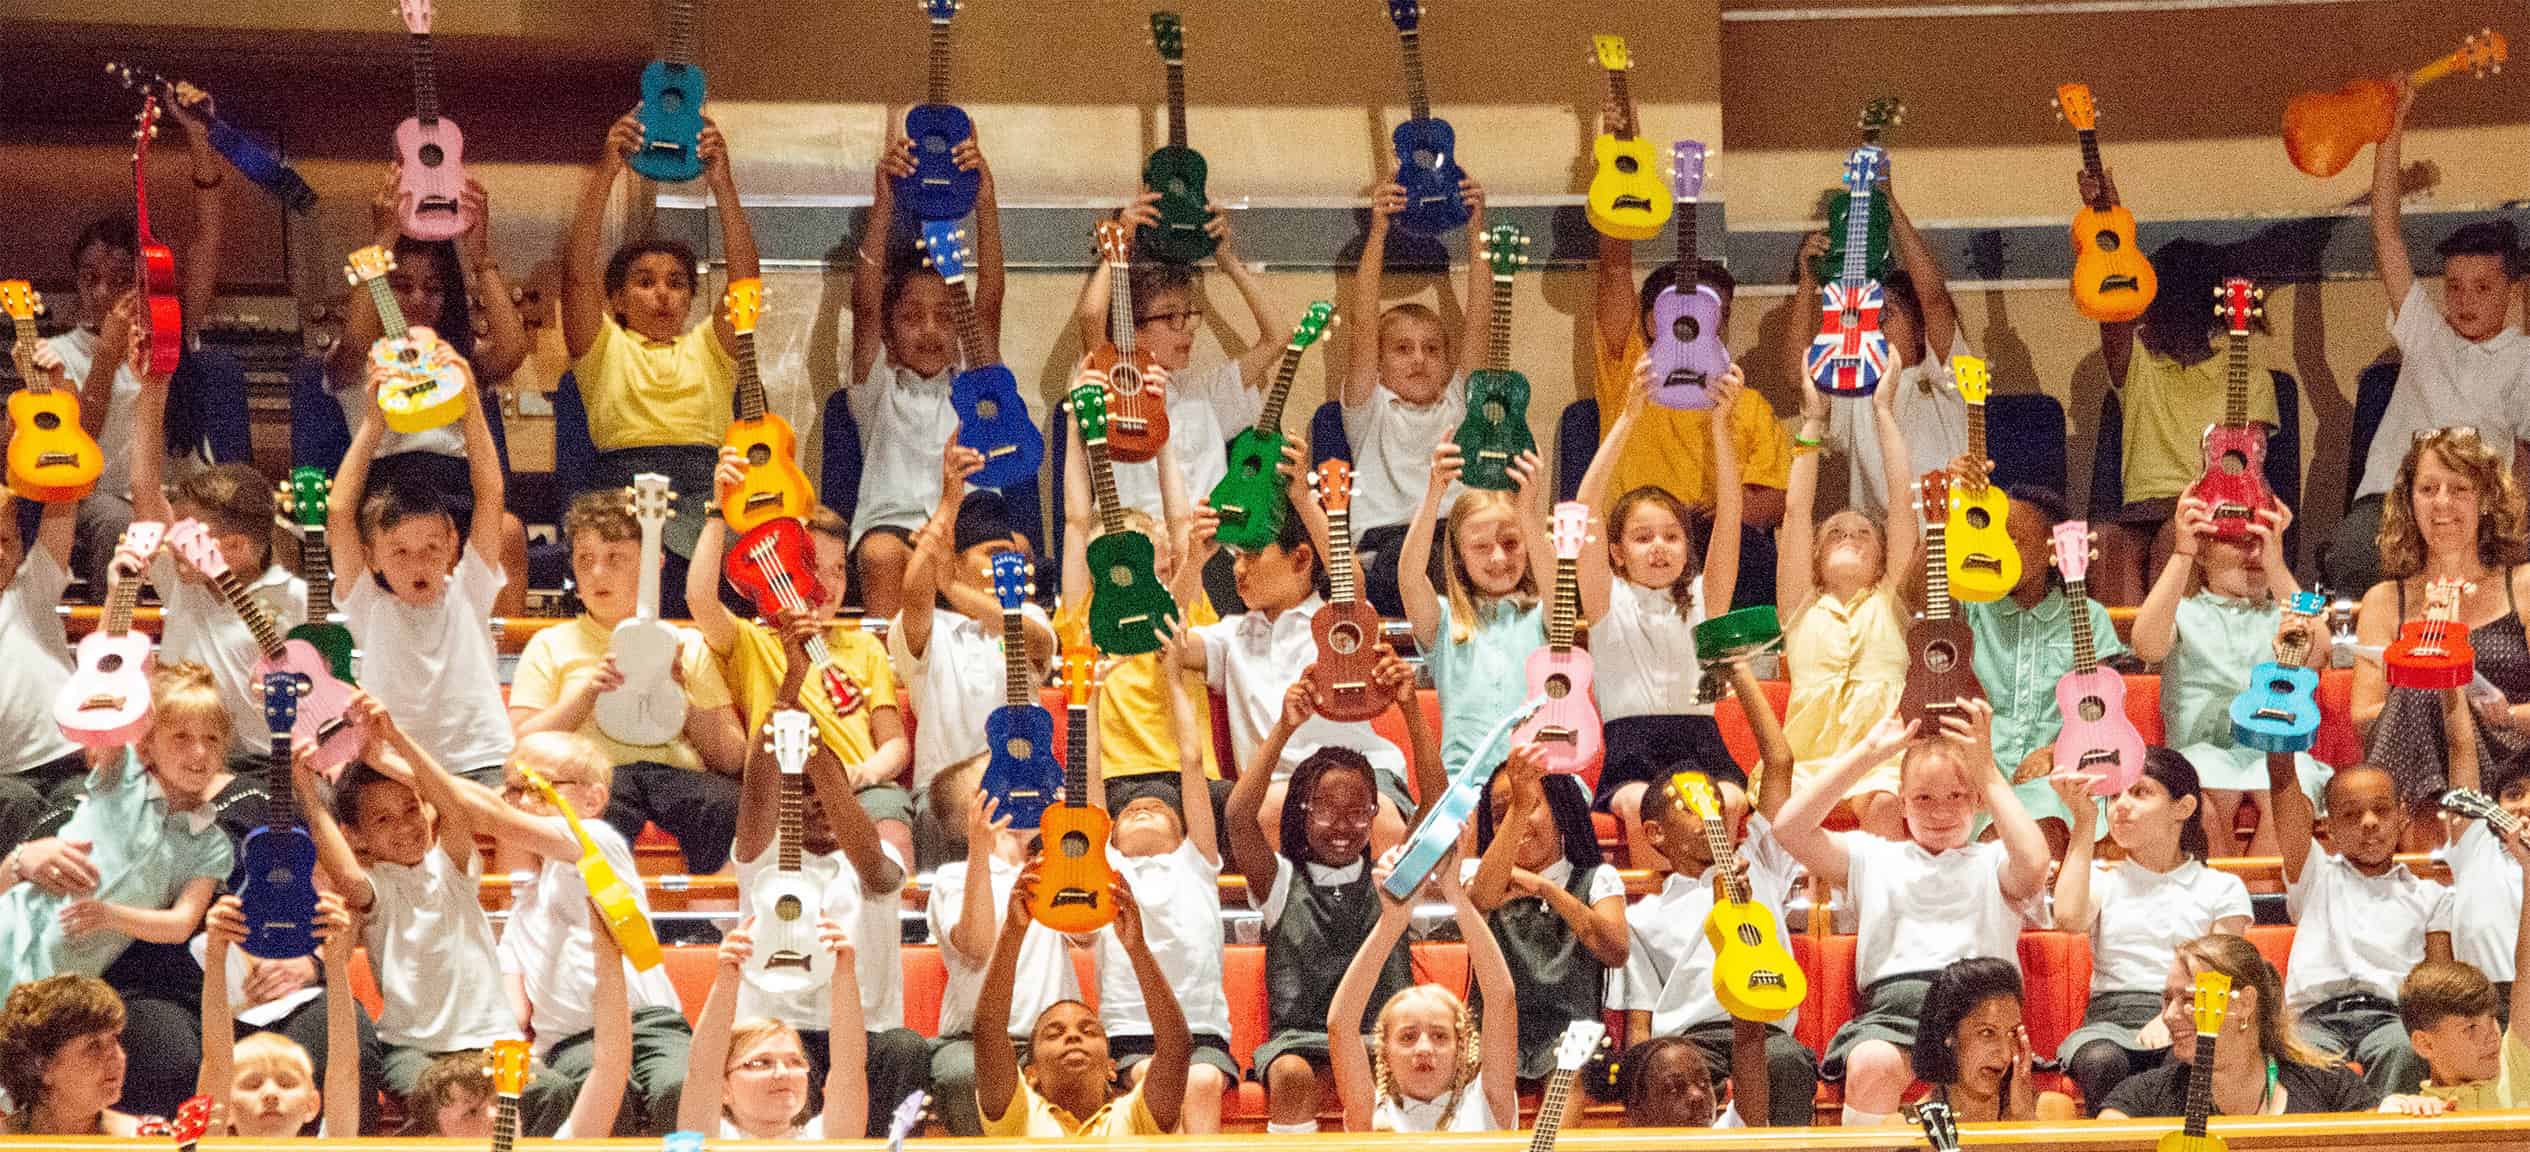 10 Reasons Why Ukulele is Often Voted as Top Instrument for Kids